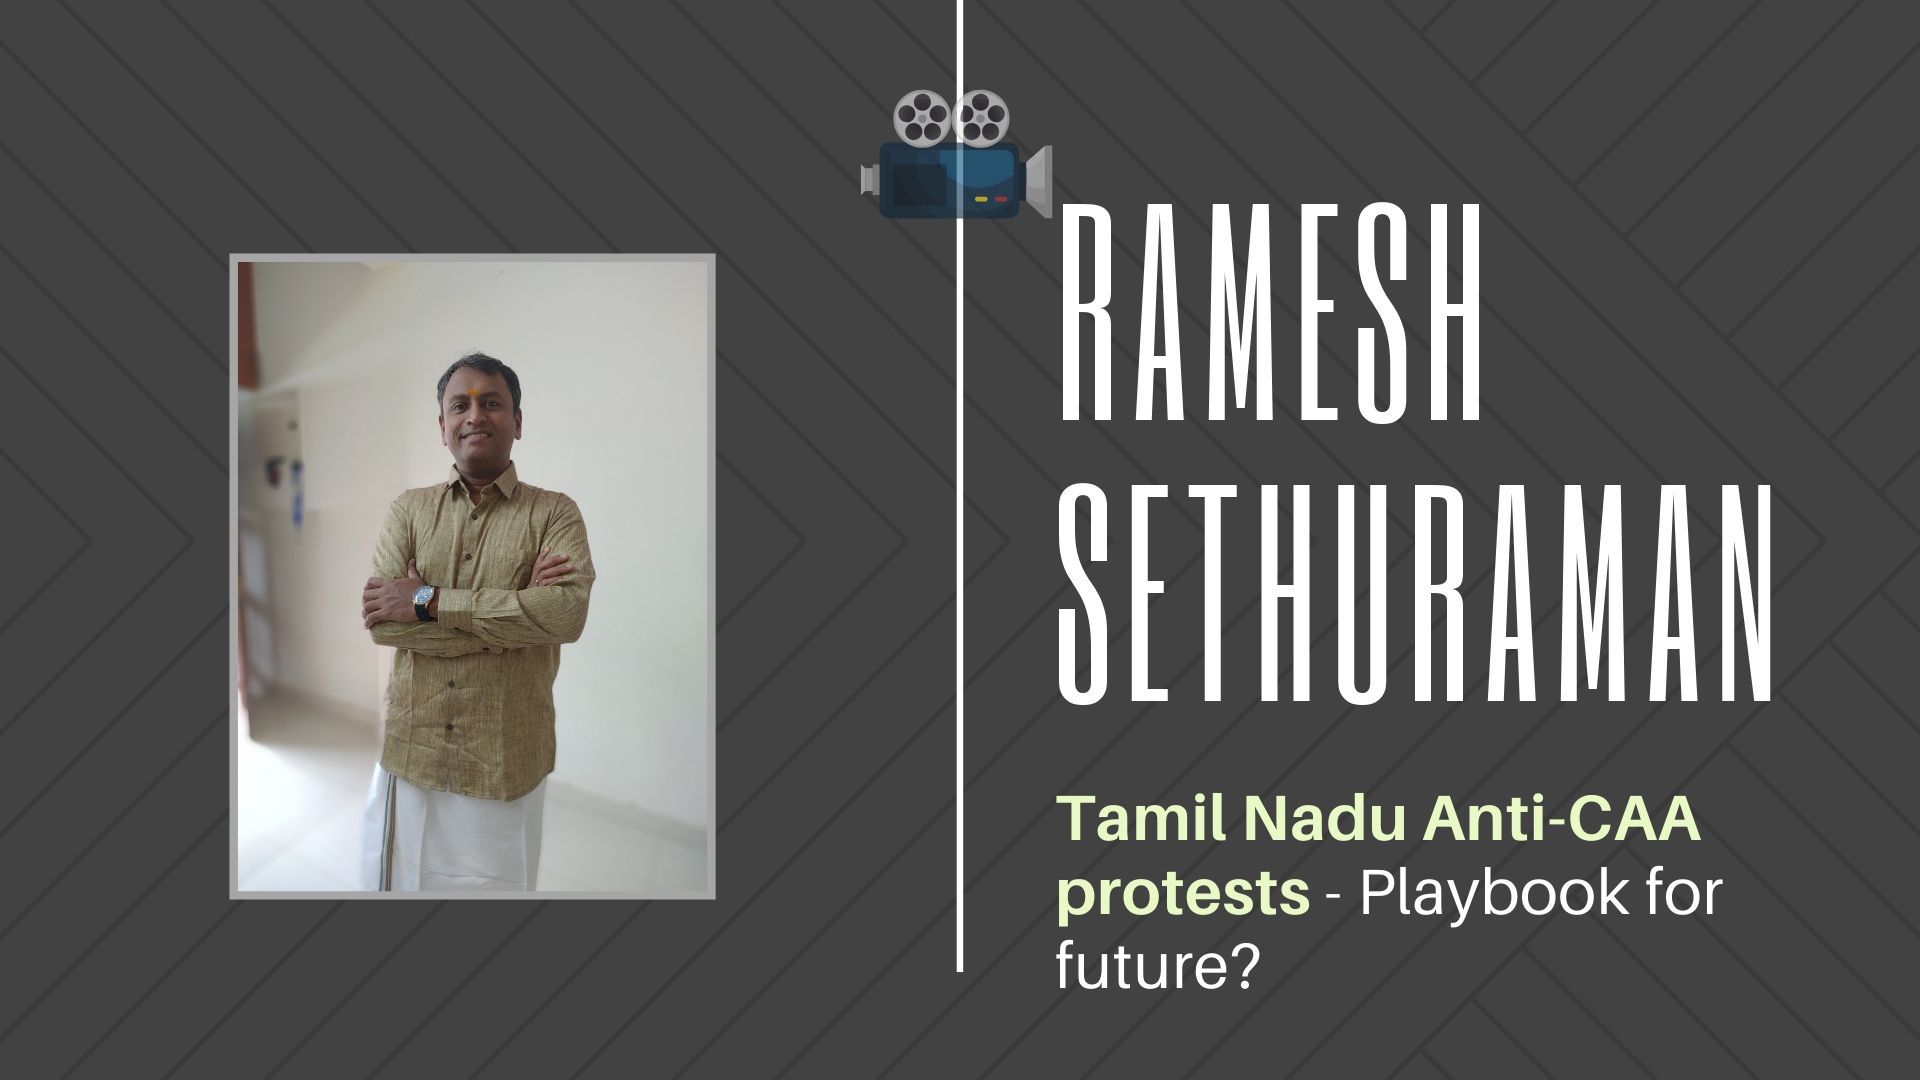 A few days back, within an hour of a clash with the Police in Chennai, Anti-CAA protests complete with banners and posters erupted throughout Tamil Nadu. Ramesh Sethu traces the beginnings of these faux protests and who is behind them.